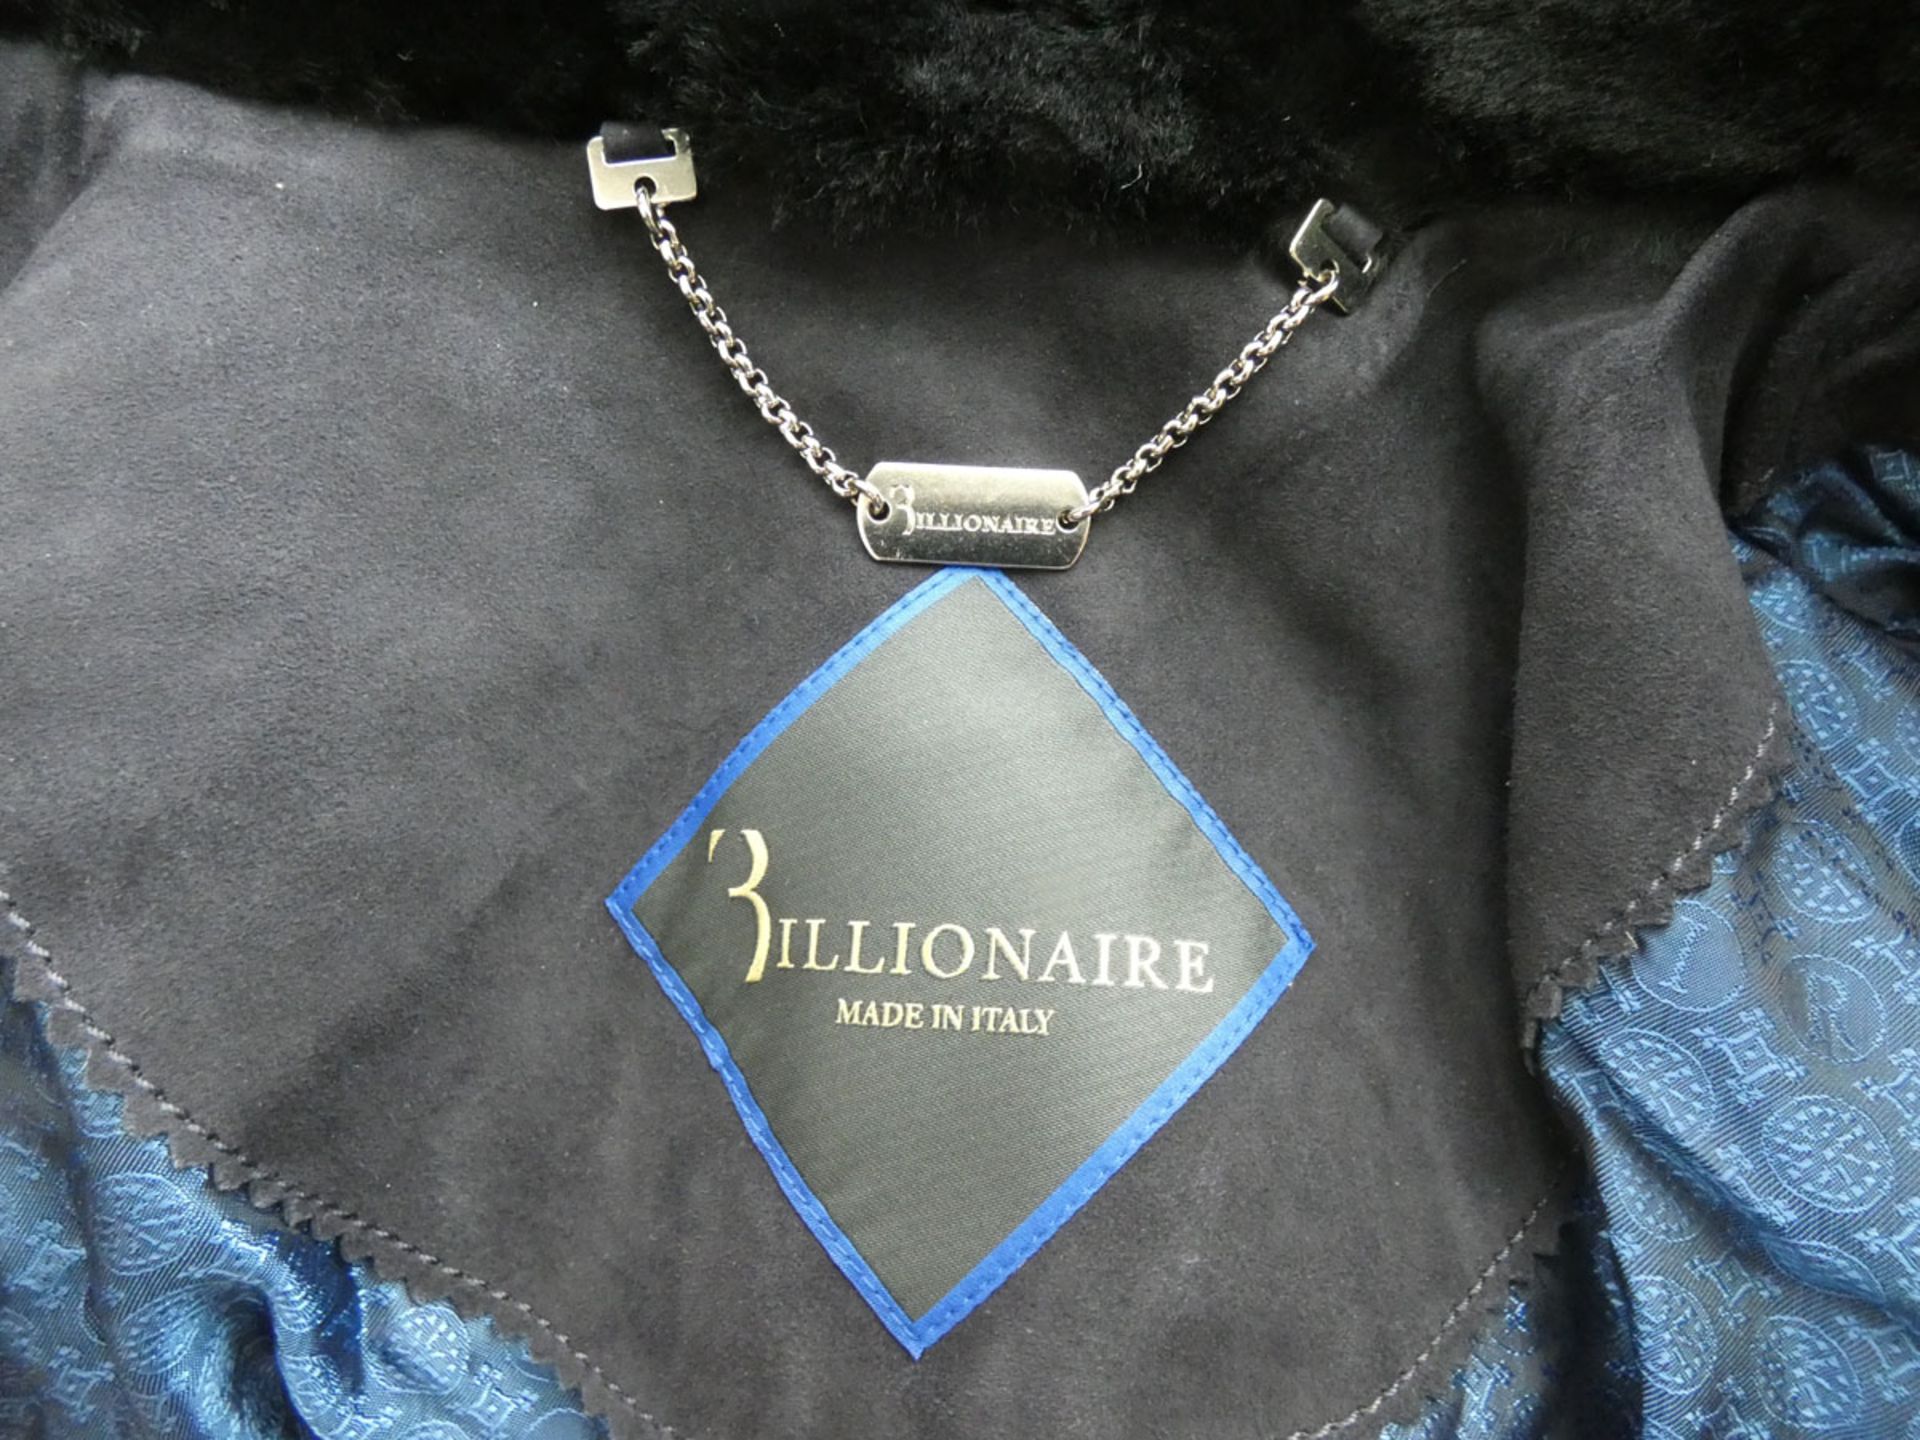 Billionaire men's leather Wallace jacket in dark blue size 54 with garment bag - Image 7 of 7